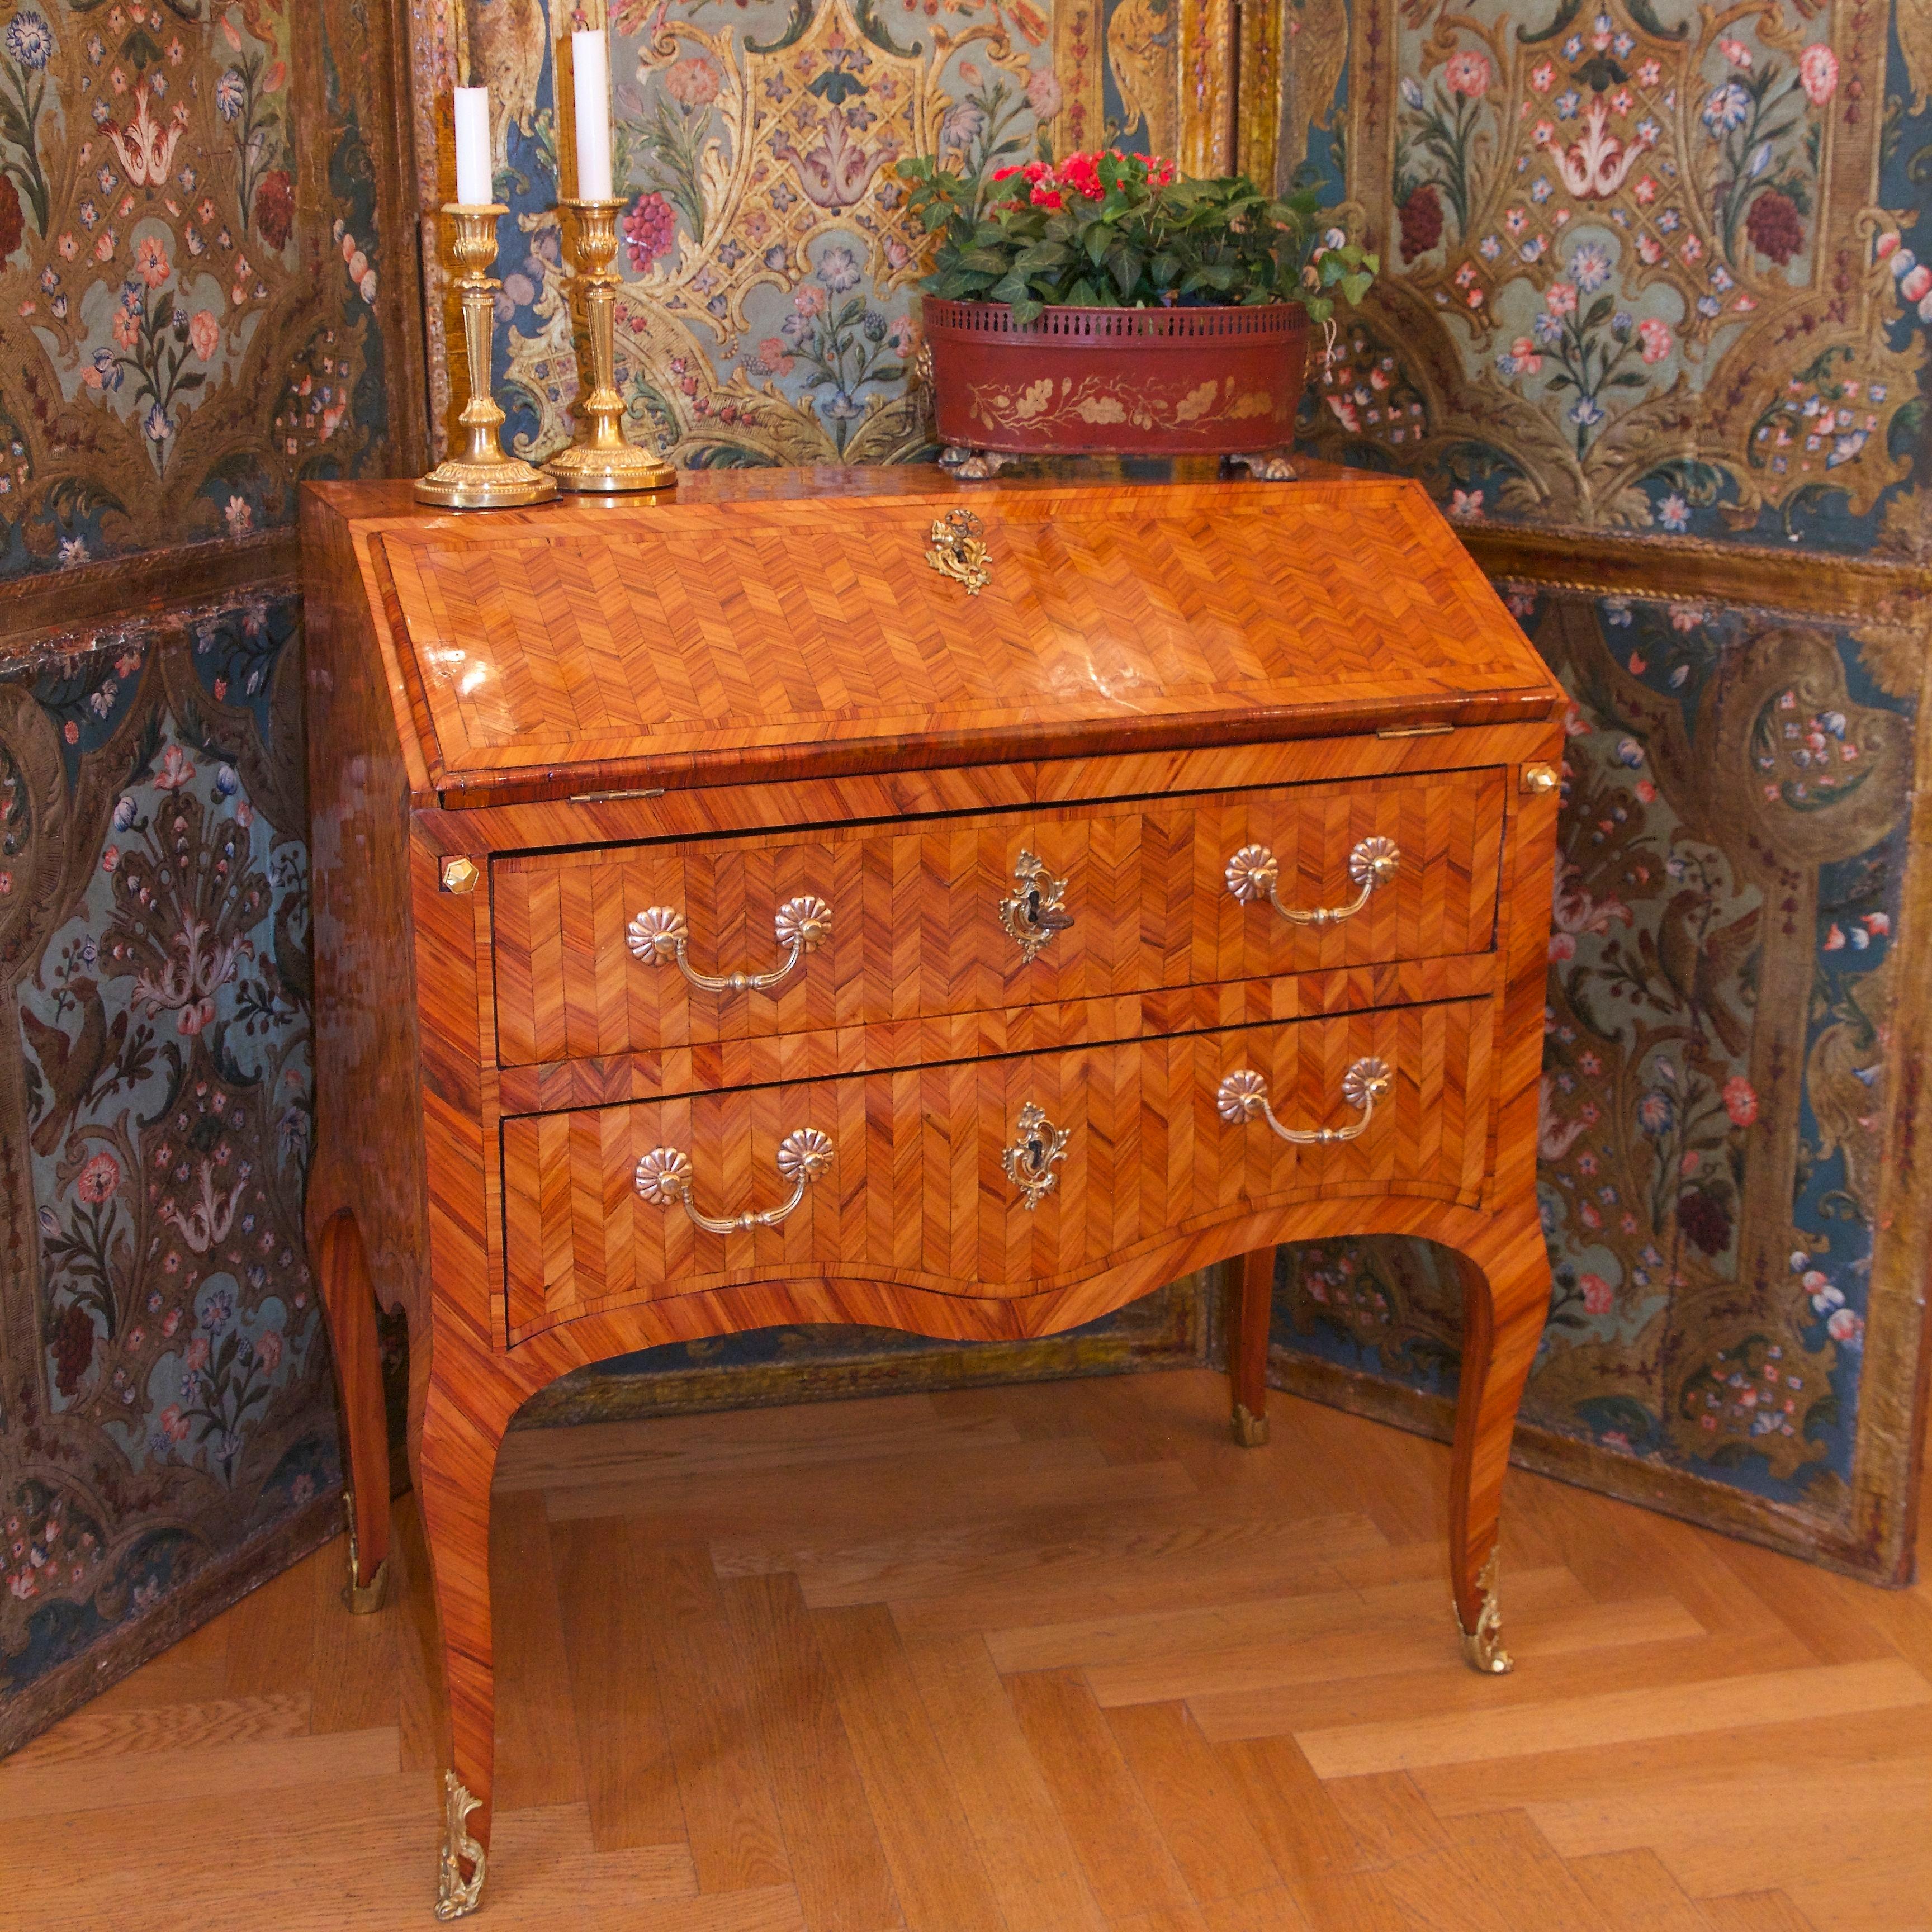 18th Century French Louis XV Tulipwood Herringbone Parquetry Commode à Secrétaire or Writing Desk

A Louis XV/Transition period commode à secétaire or writing desk combined with a chest of drawers featuring a herringbone parquetry on an oak carcase.